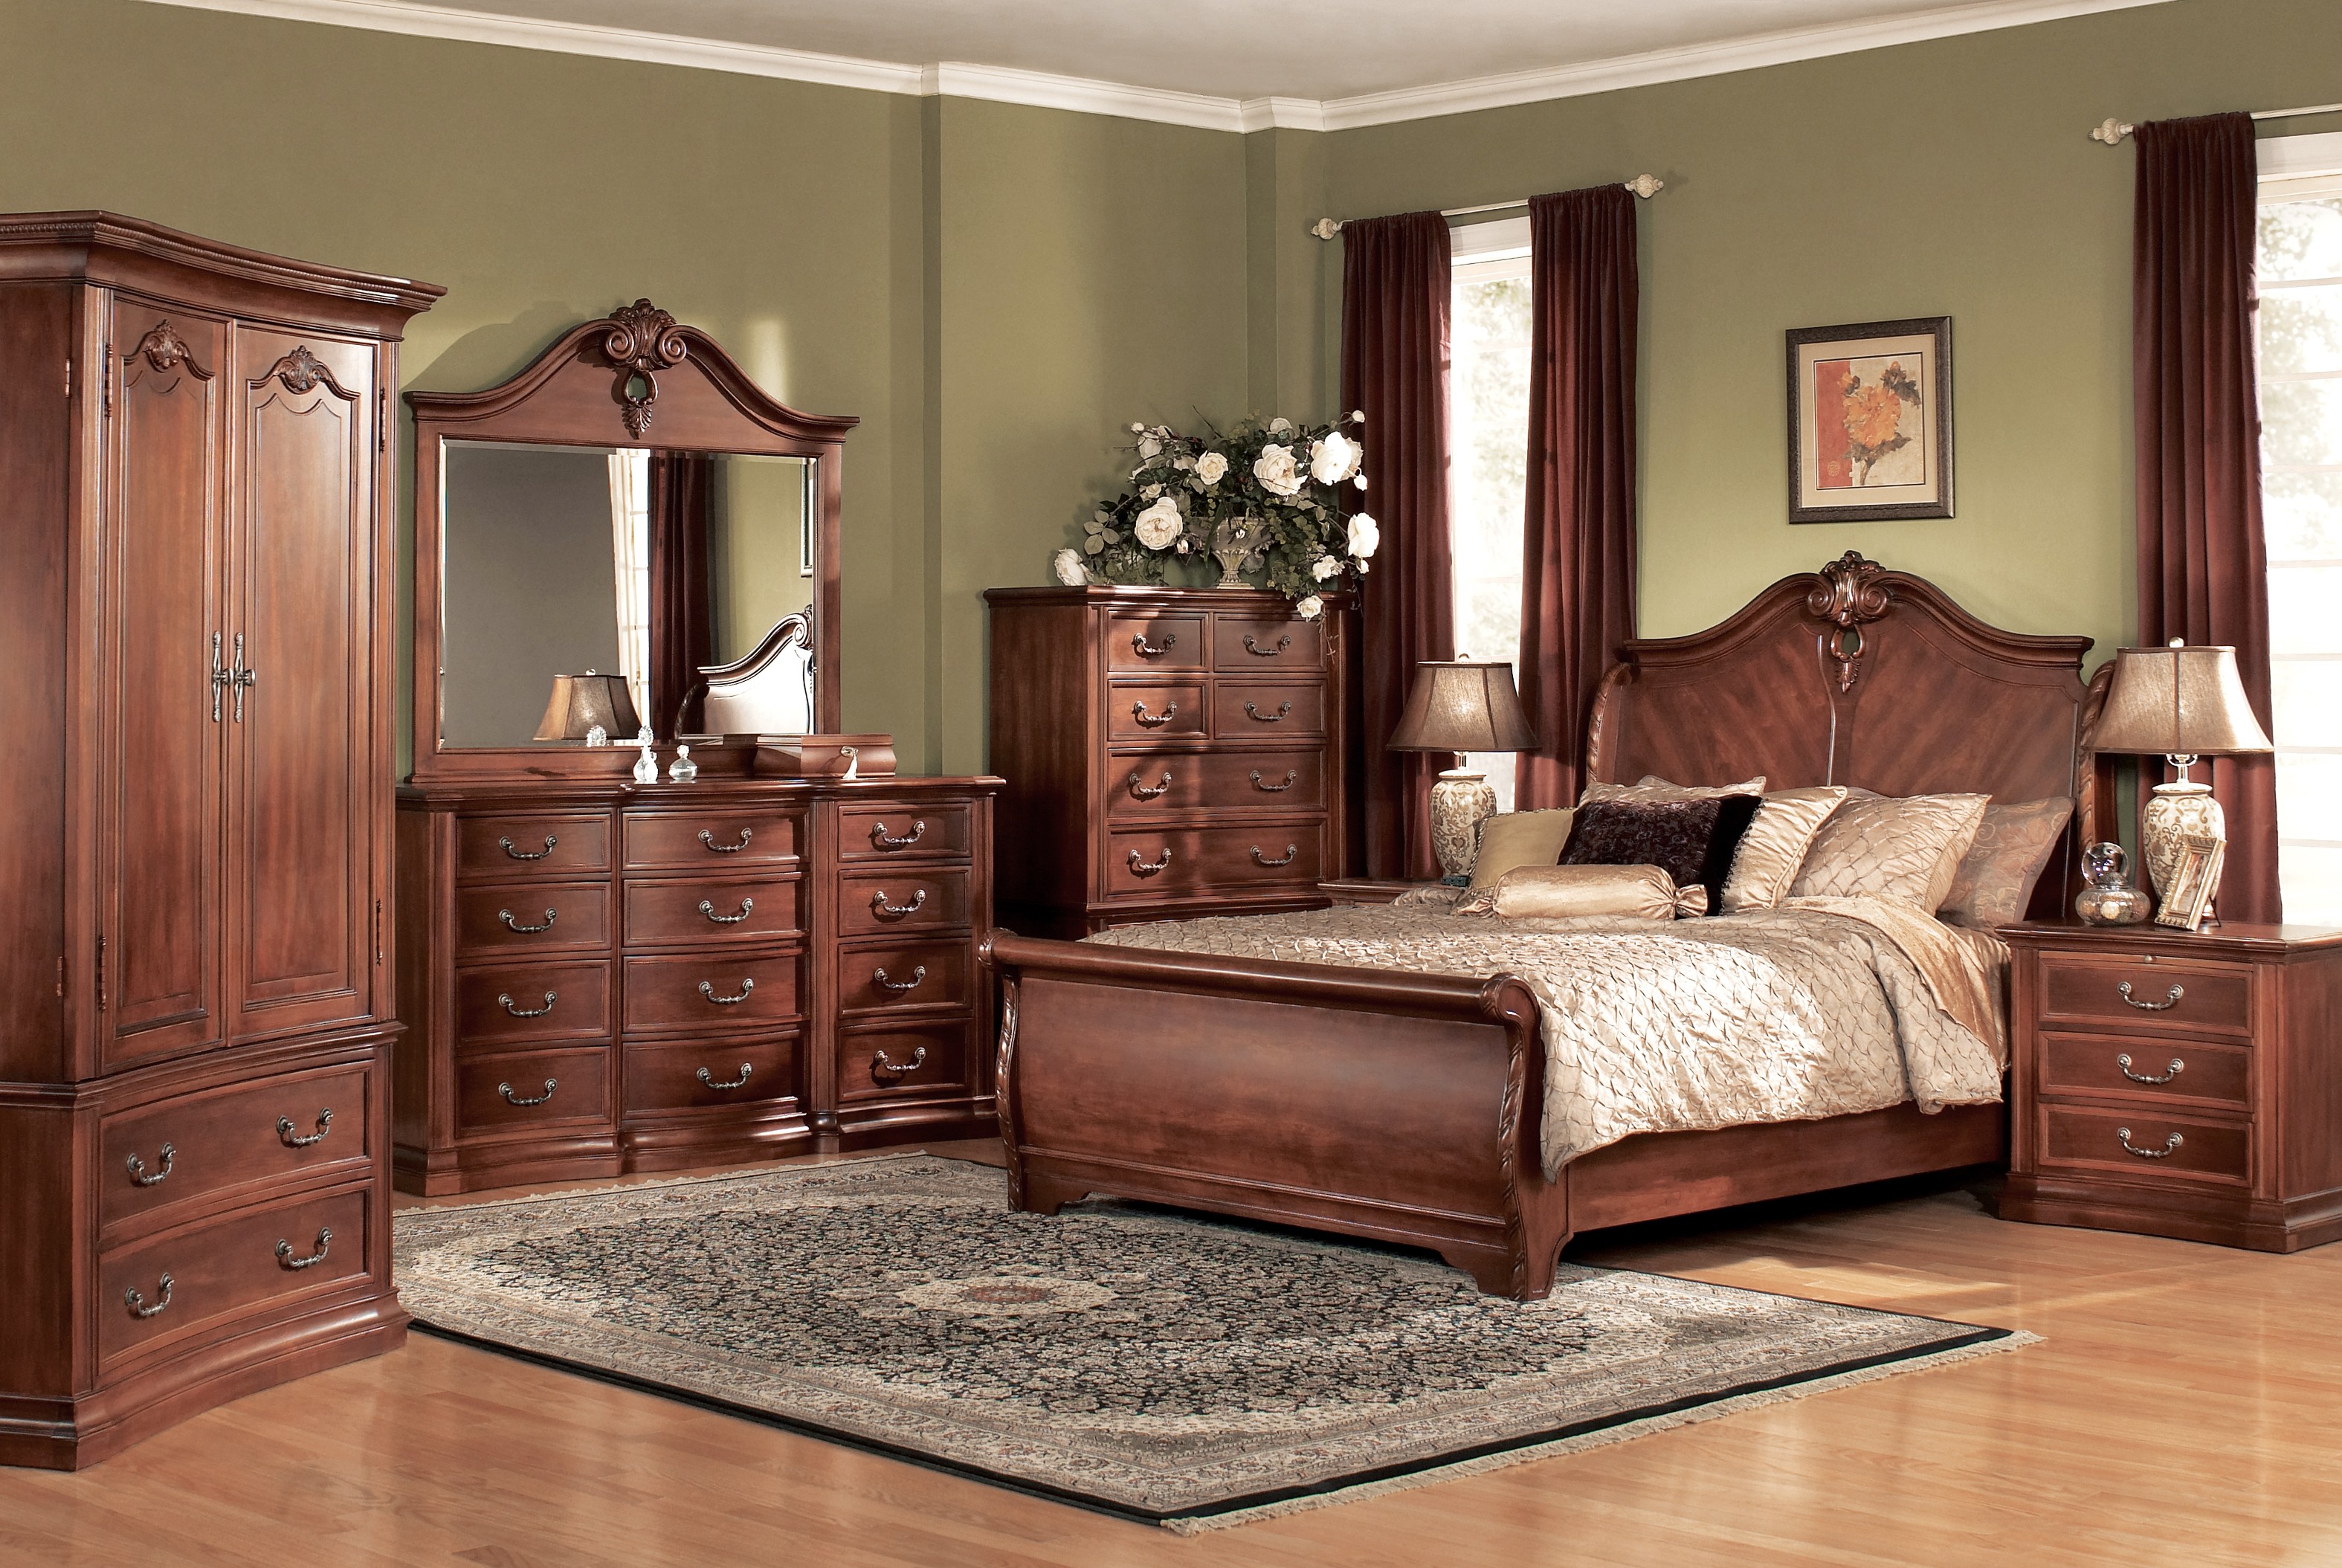 traditional home bedroom images photo - 9